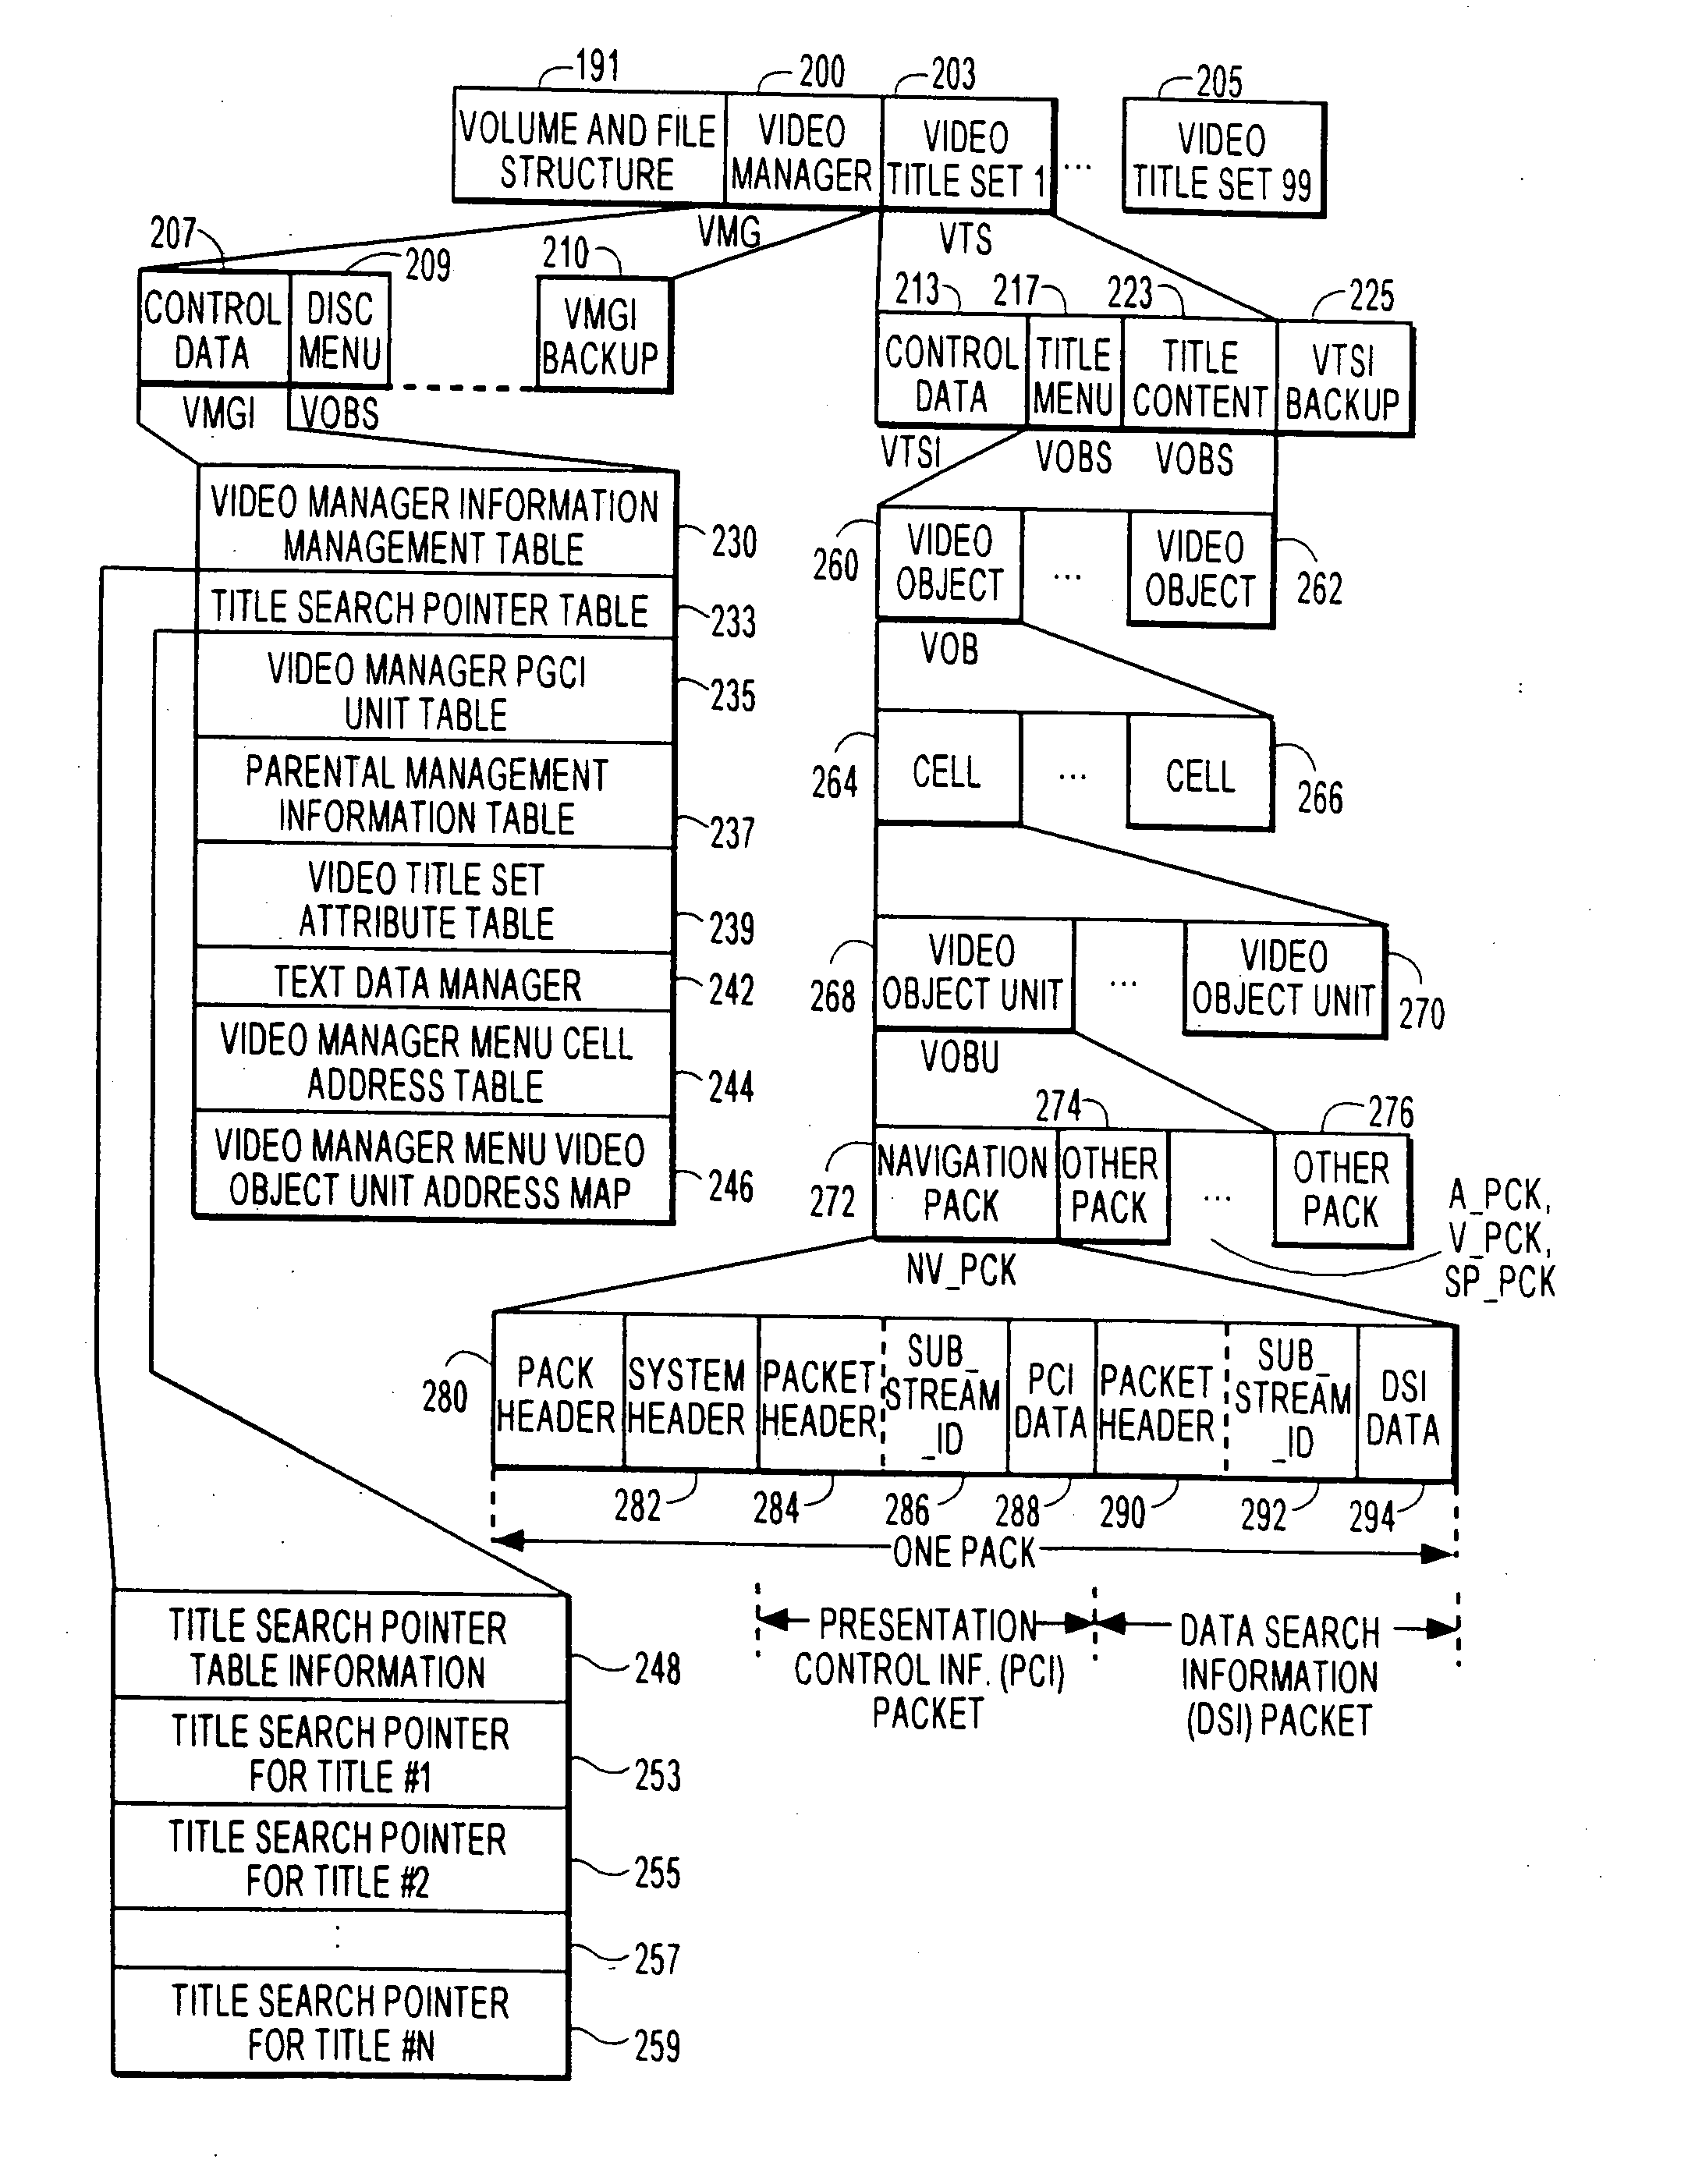 Digital video processing and storage system for video, audio and ancillary data